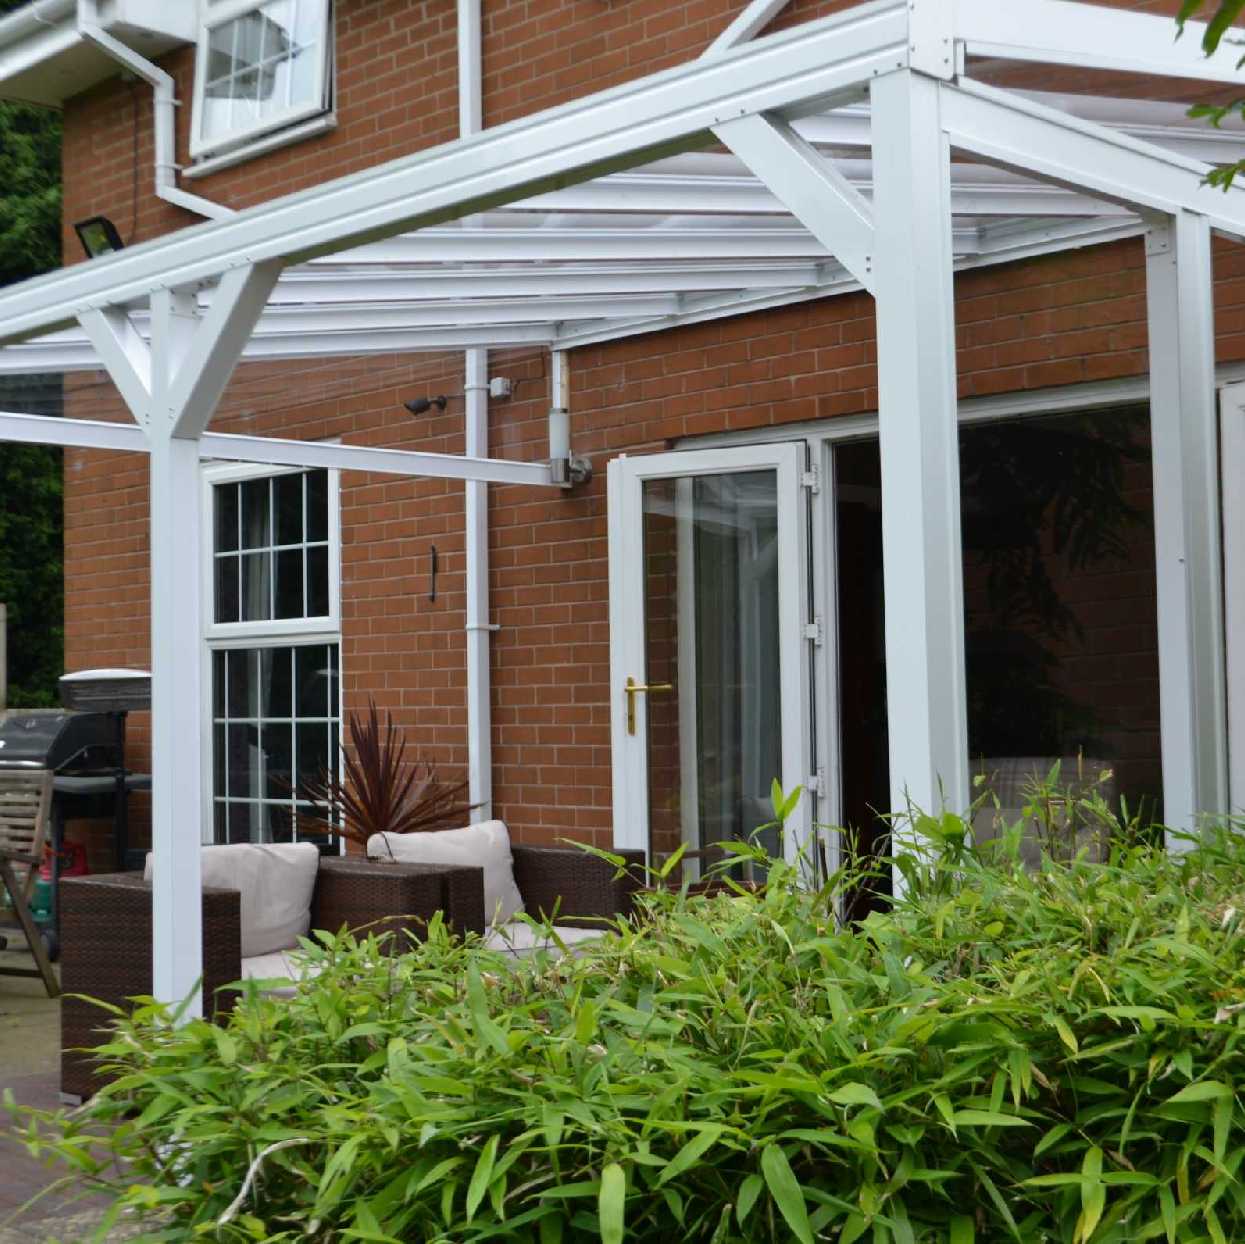 Omega Smart Lean-To Canopy, White UNGLAZED for 6mm Glazing - 7.7m (W) x 2.5m (P), (4) Supporting Posts from Omega Build